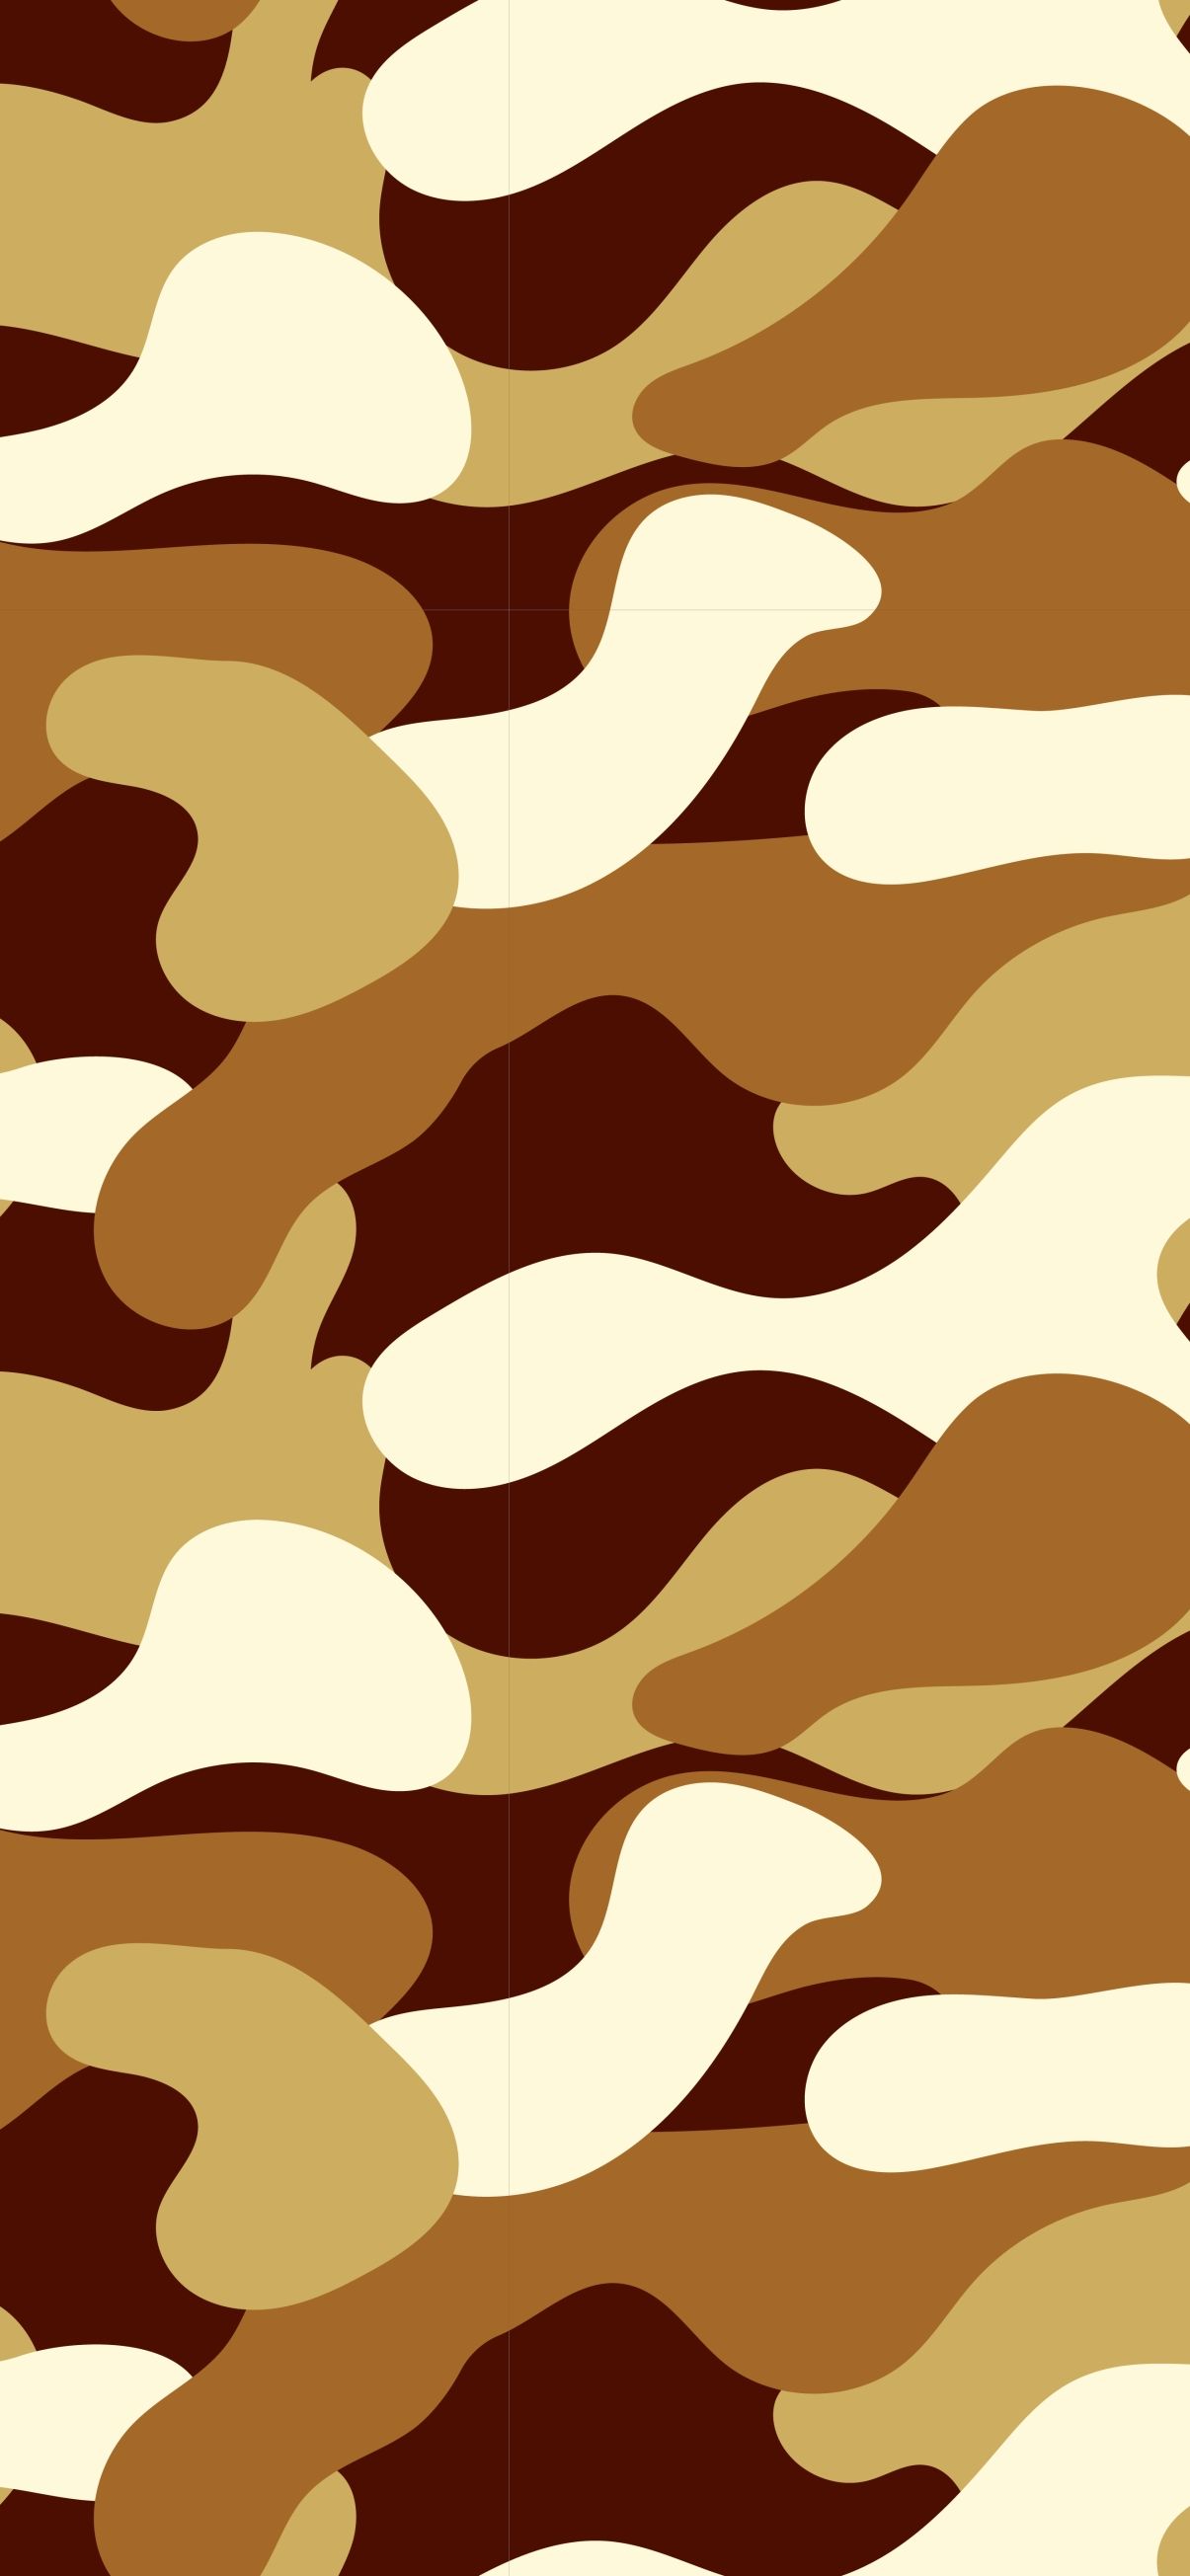 camouflage phone wallpaper in HD. Background Wallpaper